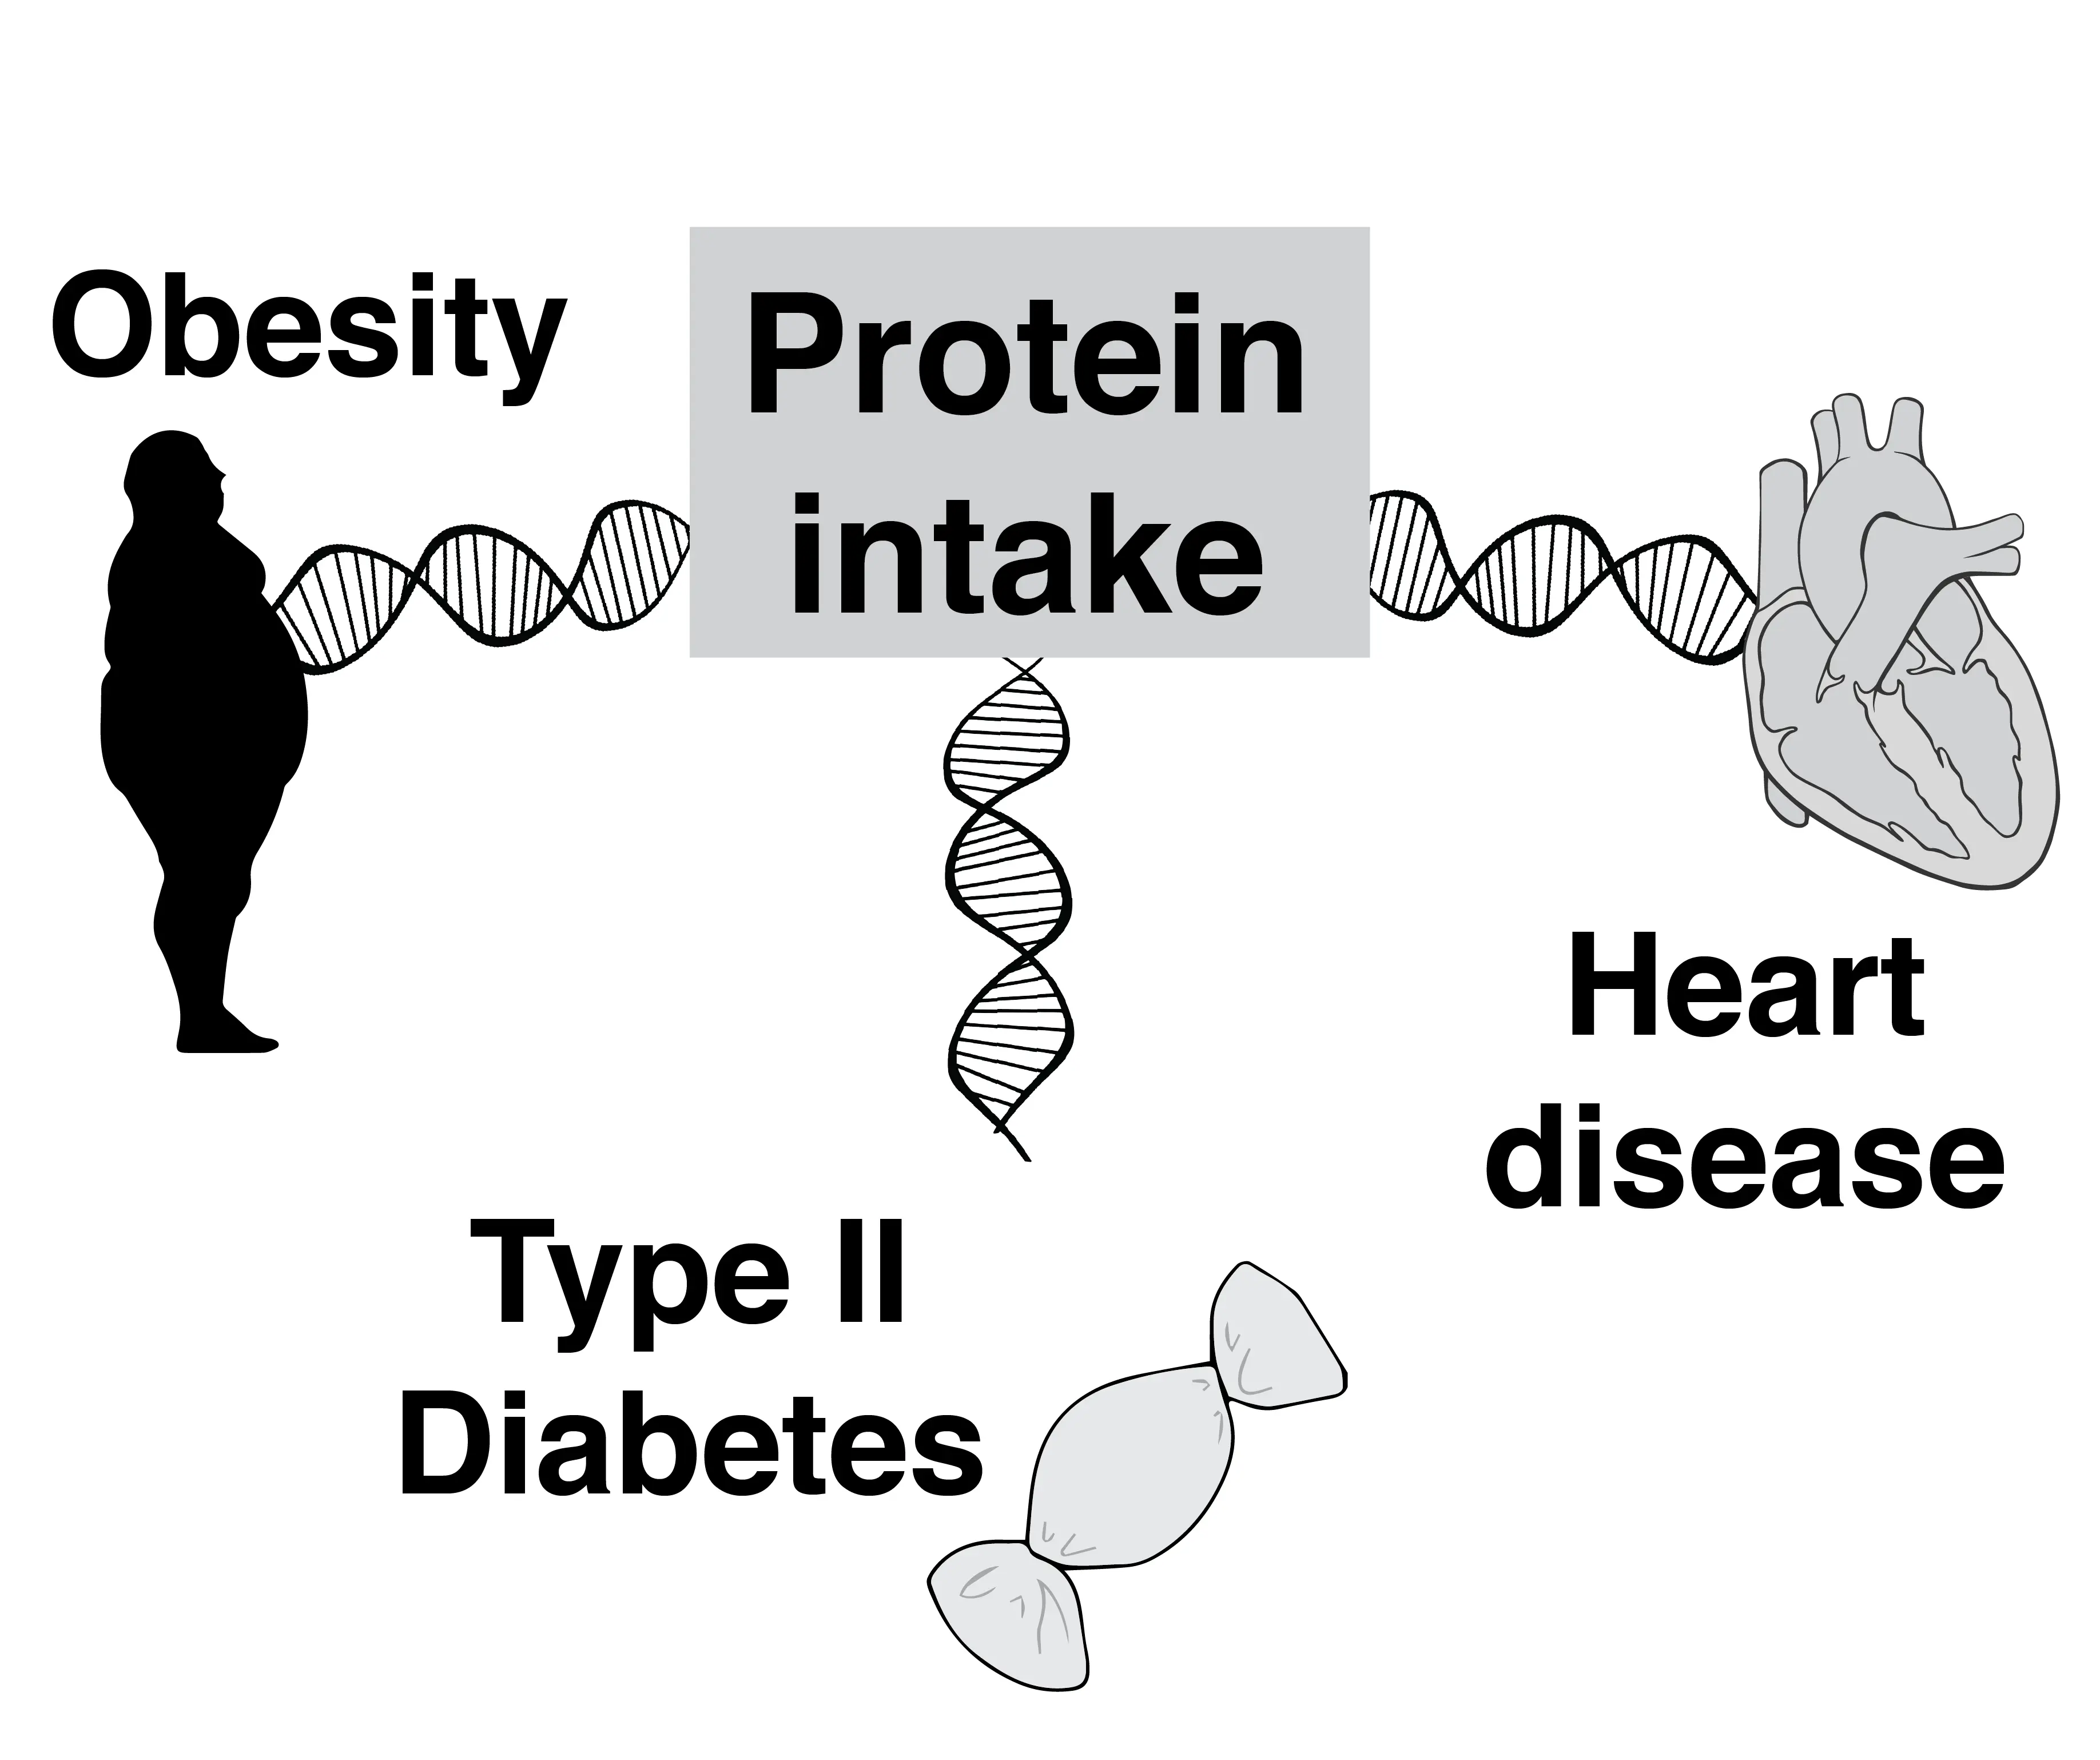 This study found a genetic correlation between higher protein intake and various diseases.